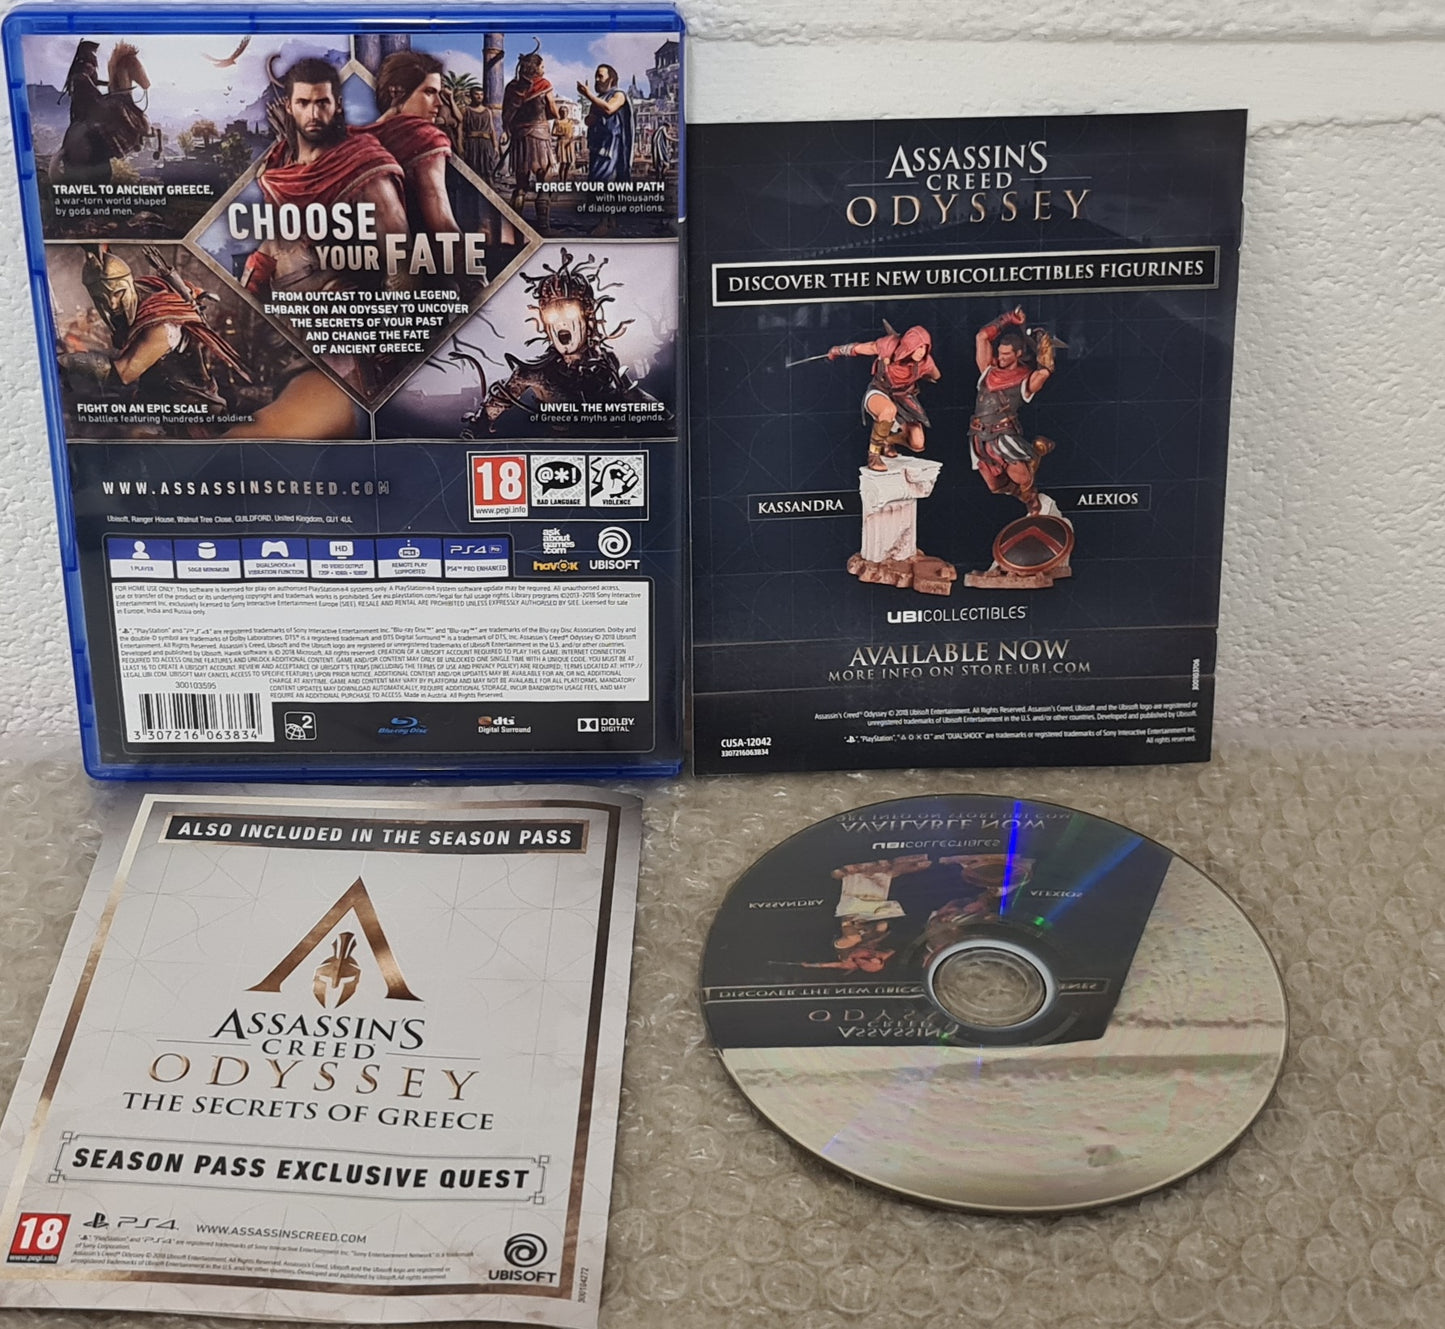 Assassin's Creed Odyssey Sony Playstation 4 (PS4) Game